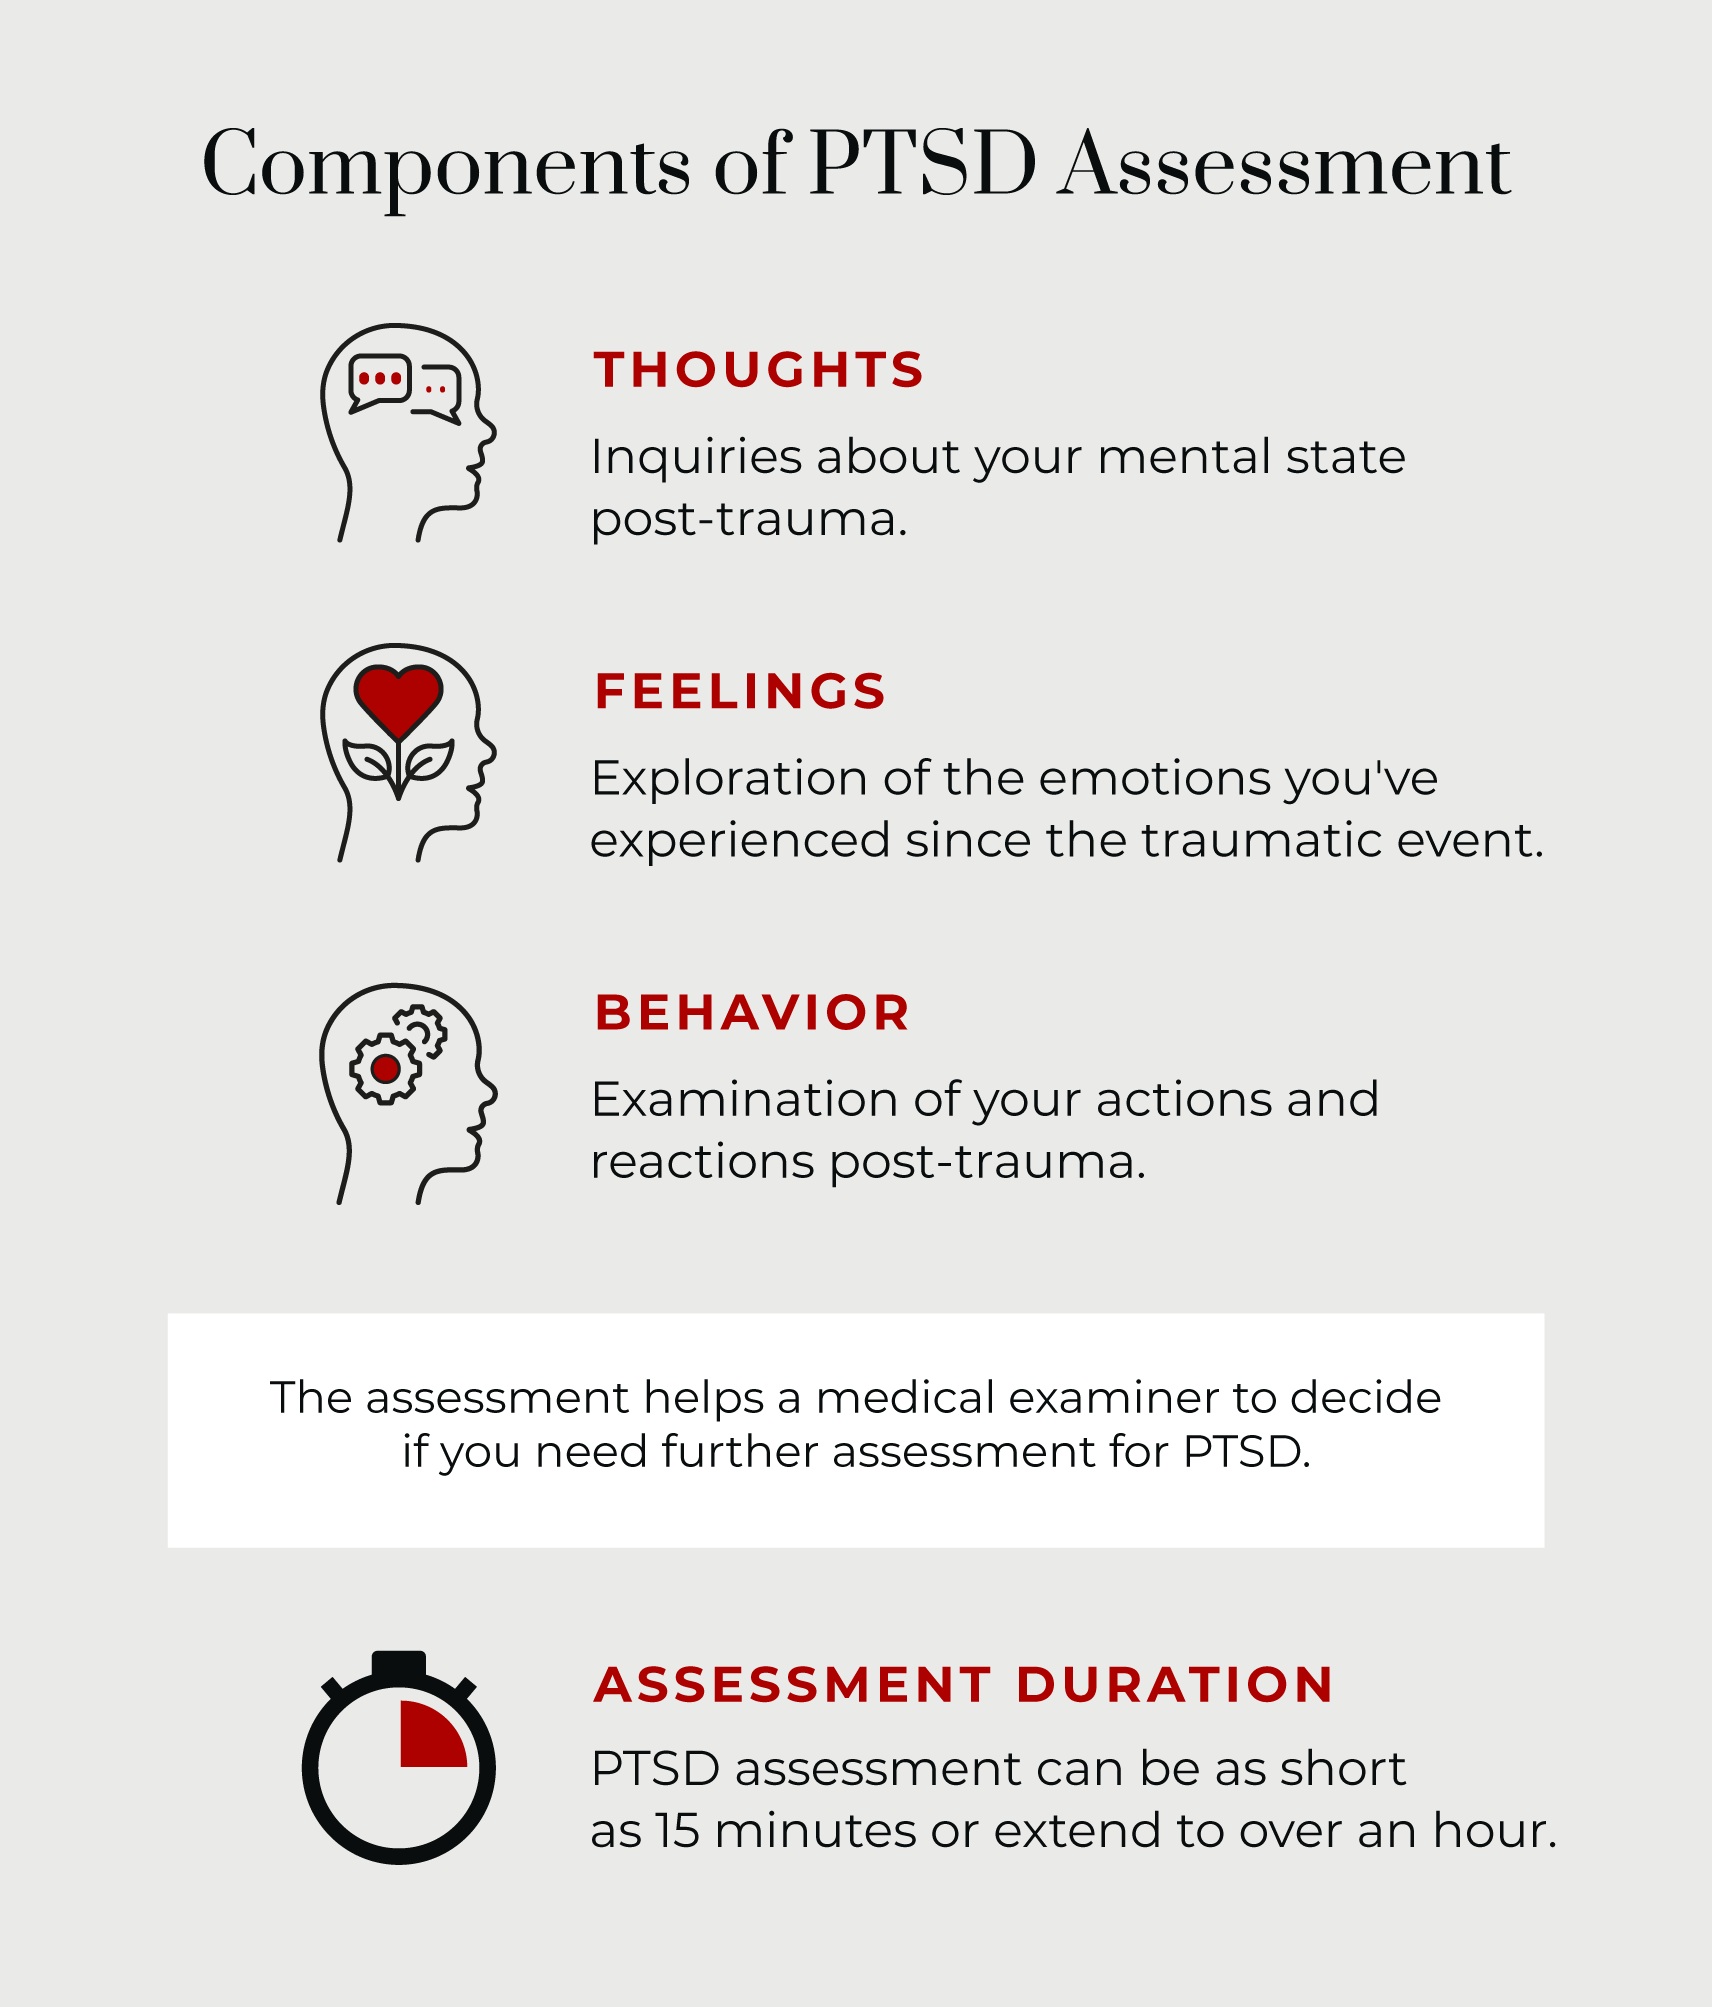 Components of PTSD assessment